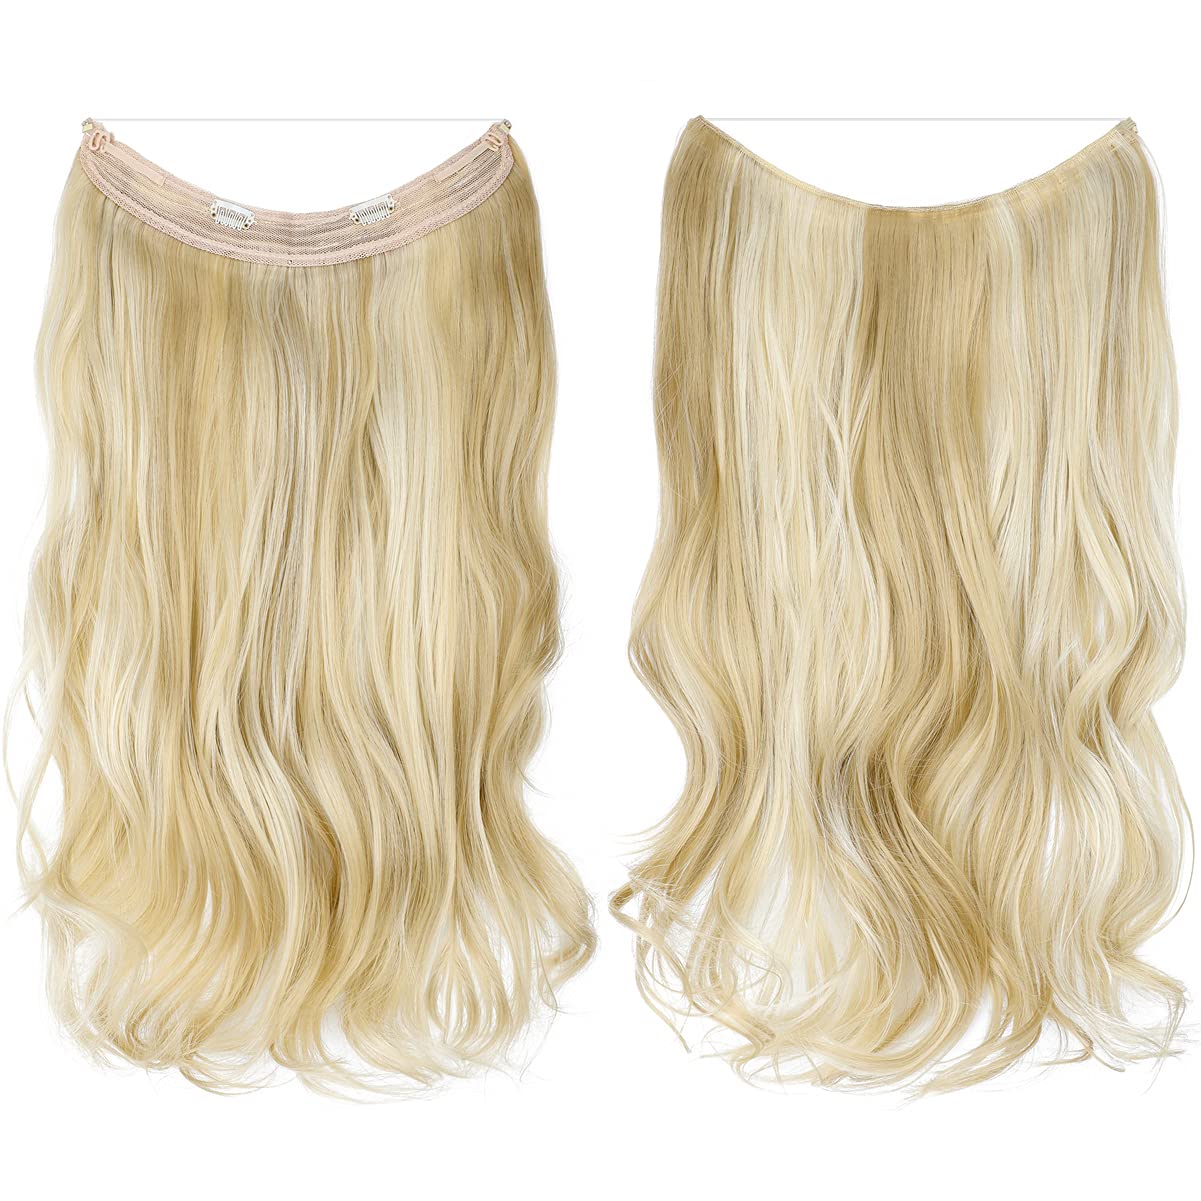 A stupendous hair in hair extension industry - 3/4 hair extension